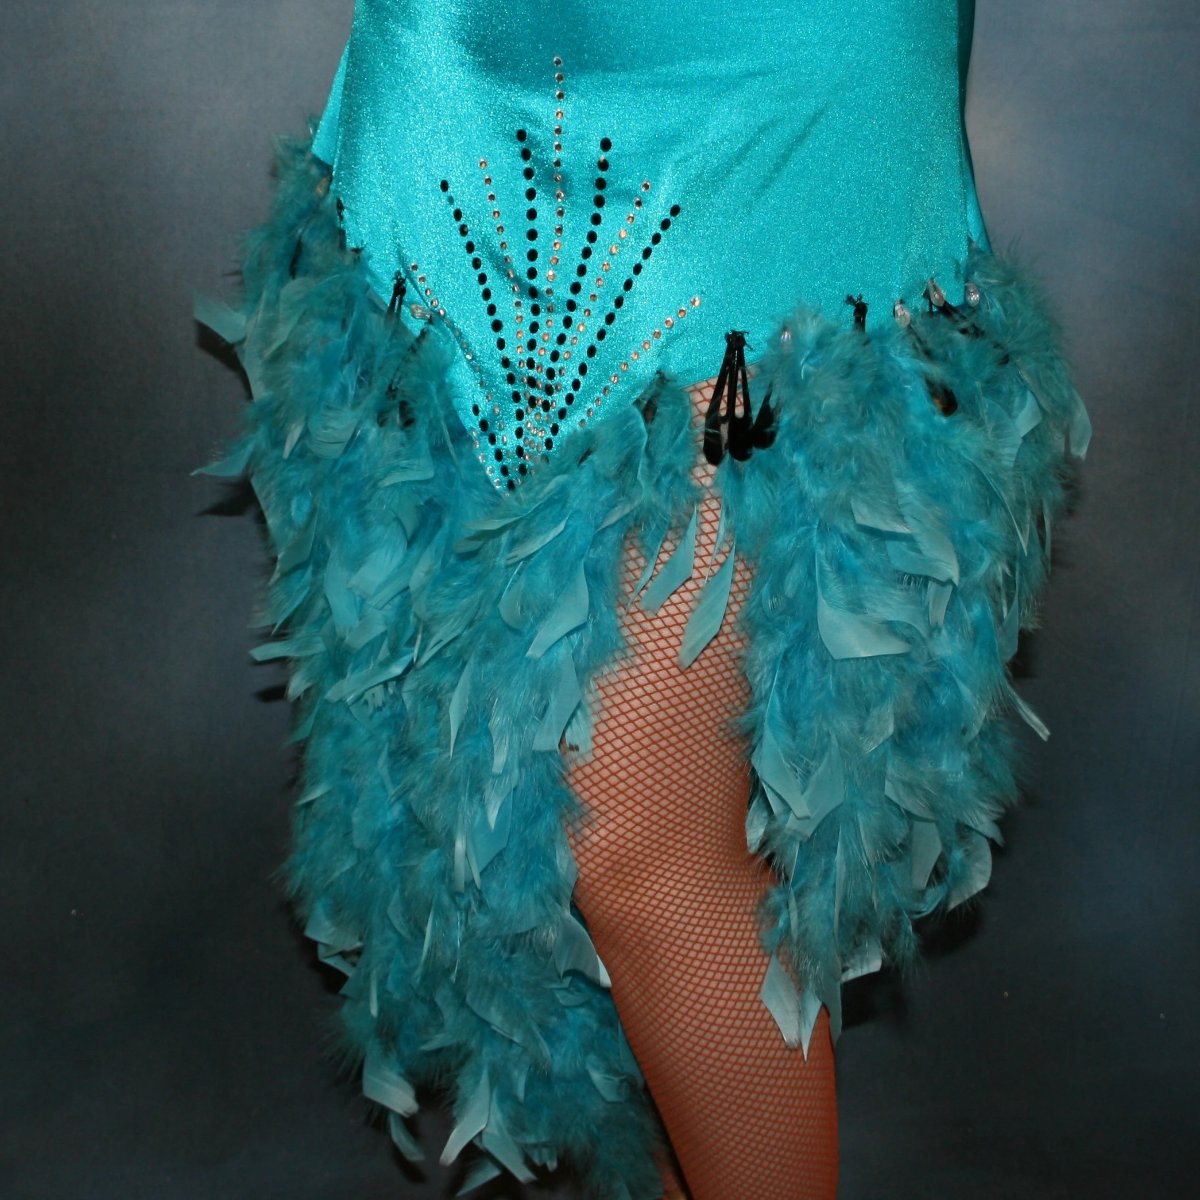 lower view of Turquoise Latin/rhythm dance dress created in turquoise lycra on nude illusion, is embellished with crystal and jet black Swarovski rhinestones, with chandelle feathers and black spangles. The v styled skirt slits up high on both sides. Matching arm bands complete the look.